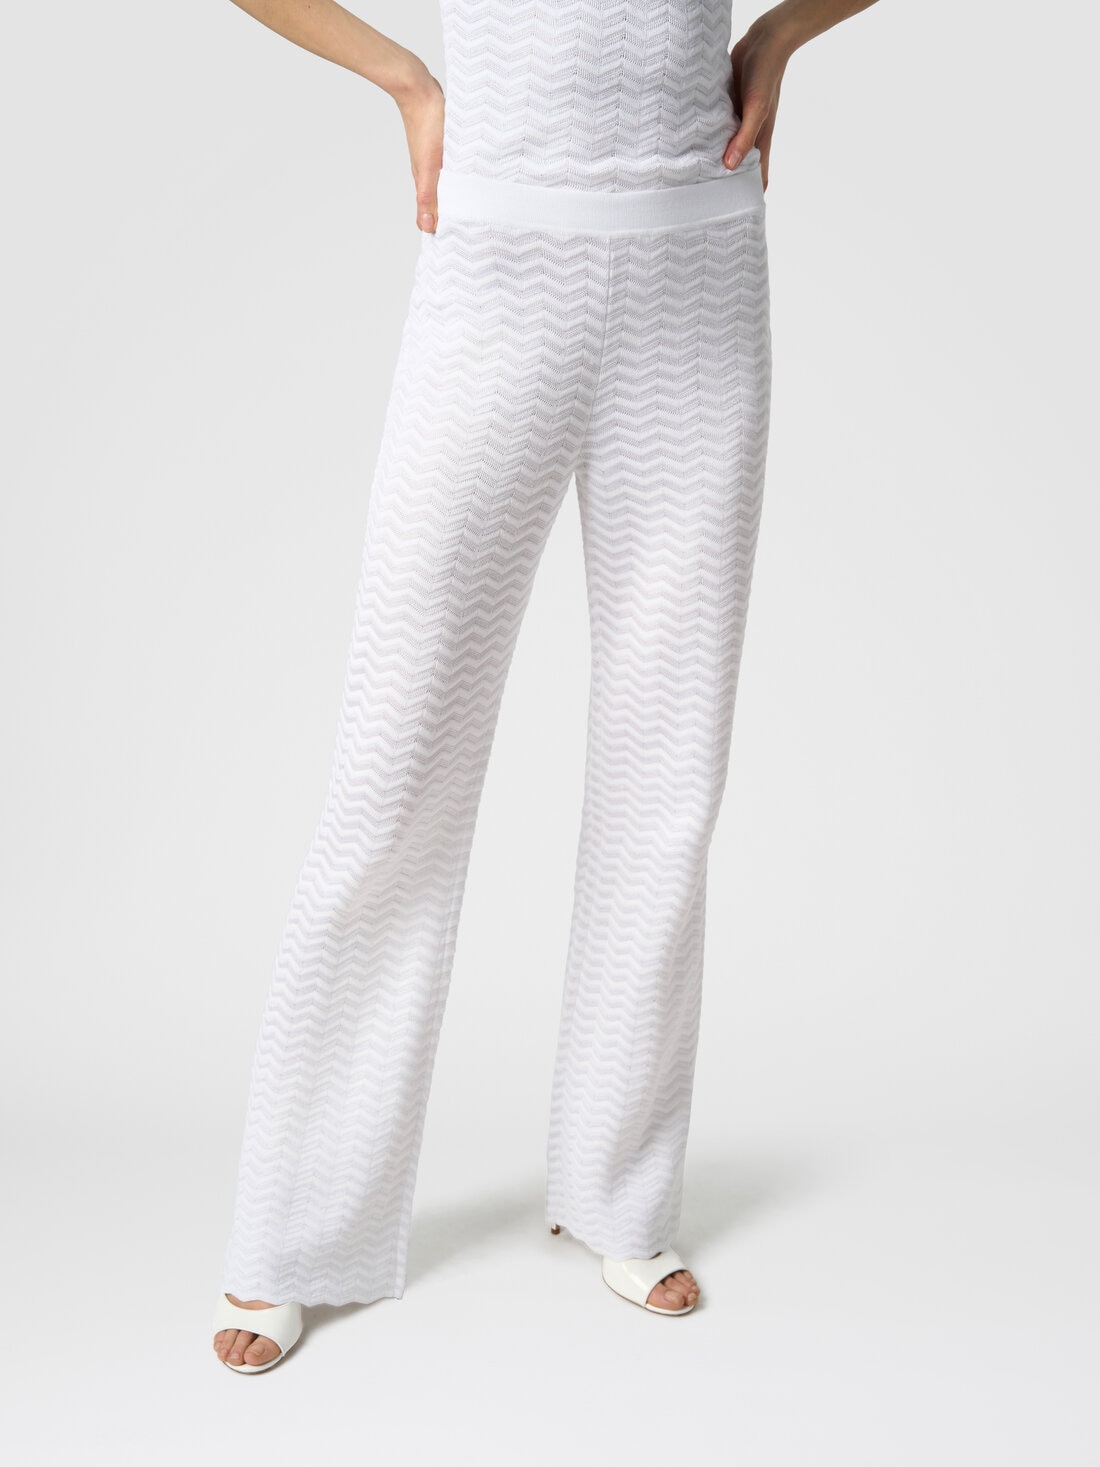 Trousers in zigzag knit  , White  - DS24SI0NBK033W14001 - 3